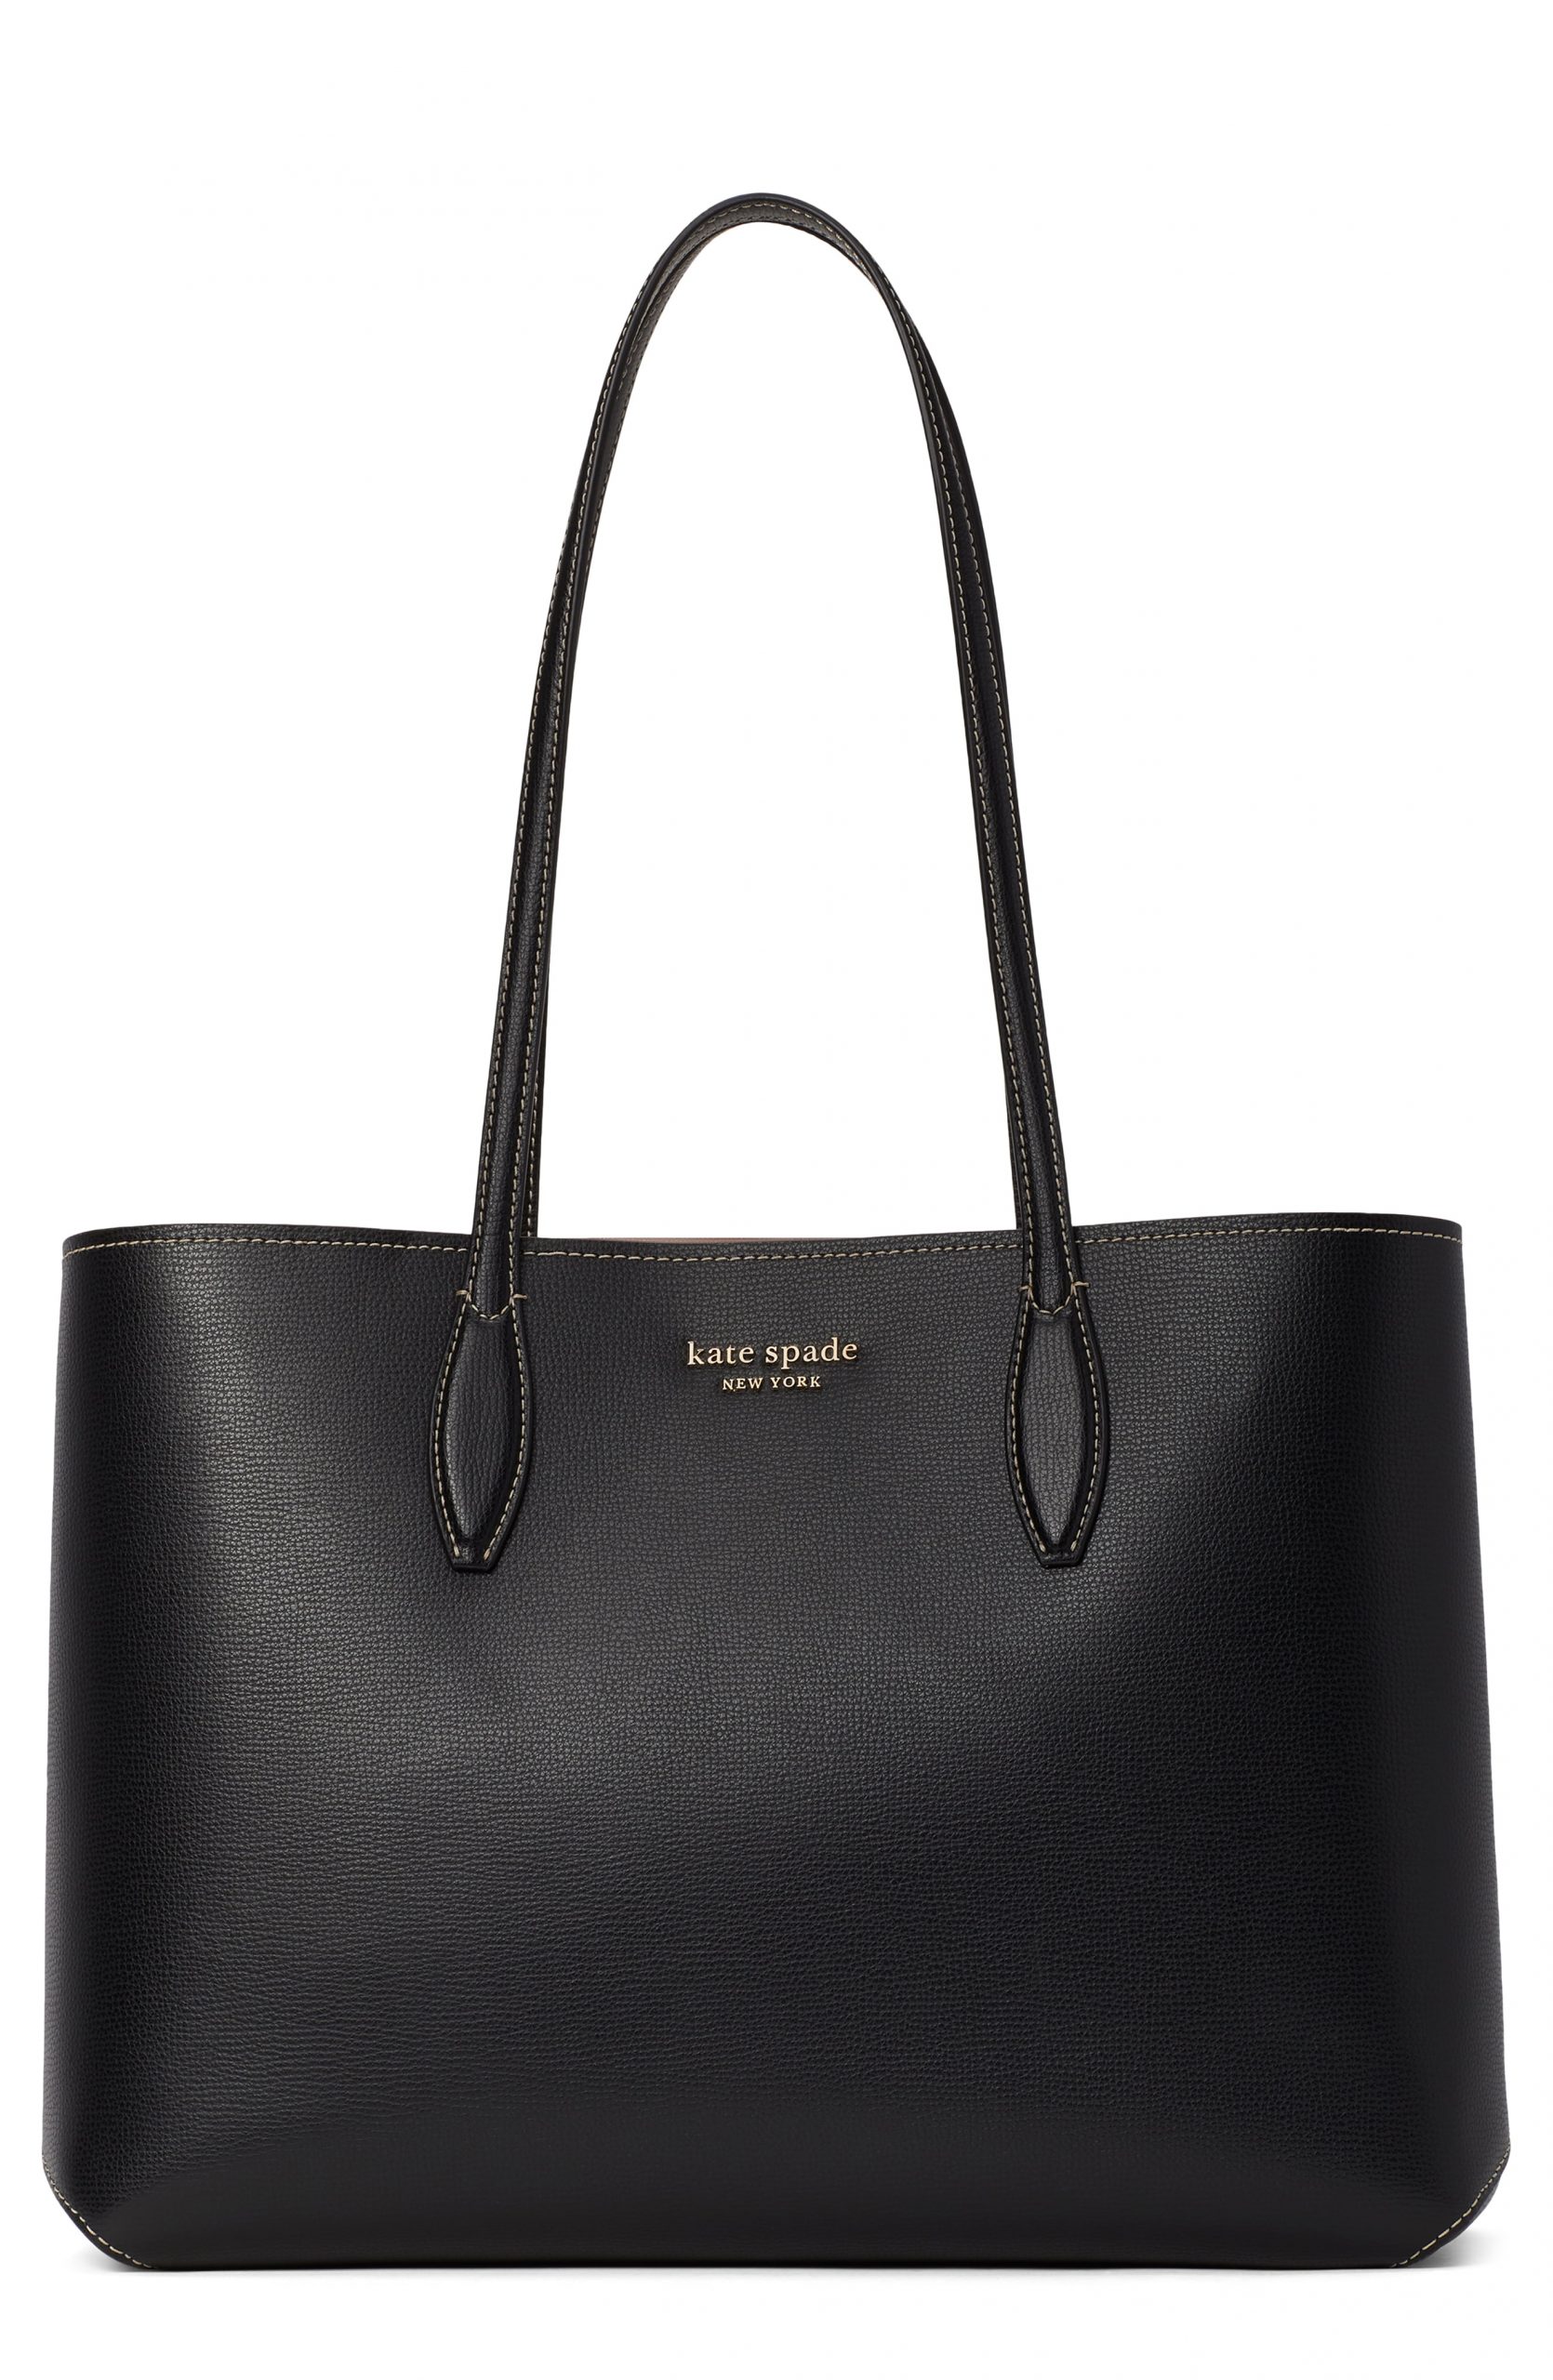 Kate Spade New York All Day Large Leather Tote - Black | Fashion Gone Rogue